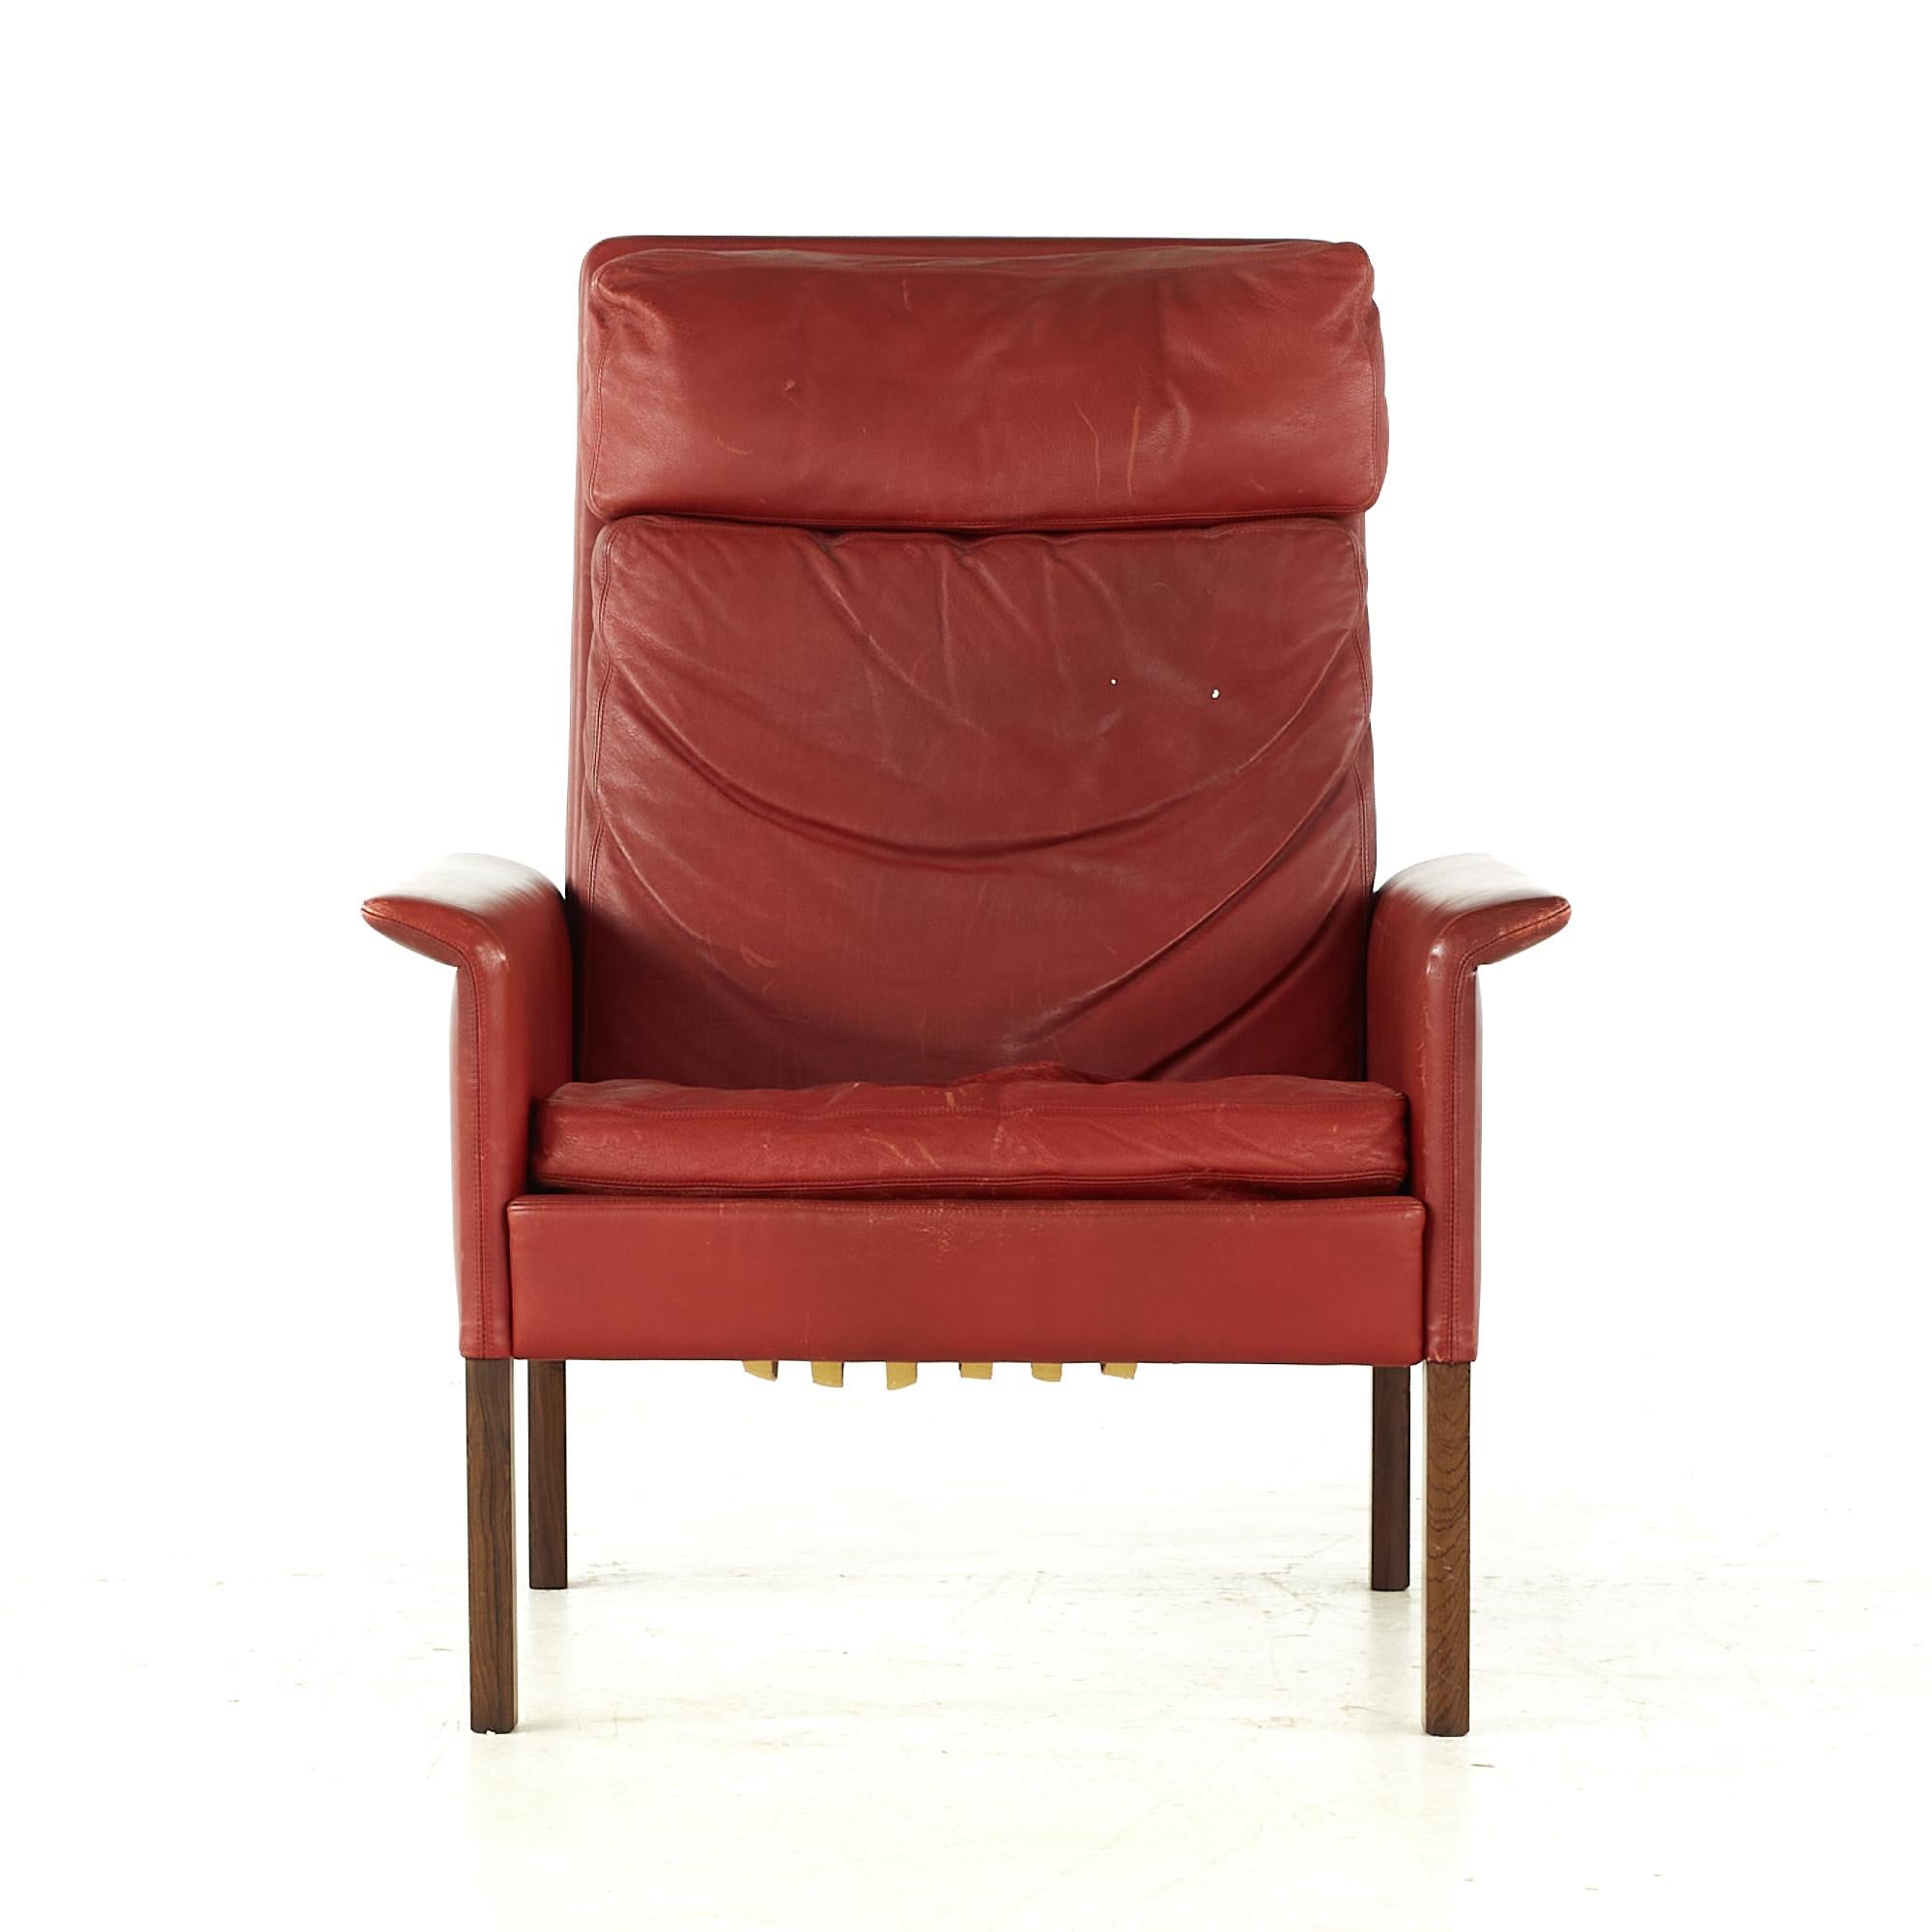 Late 20th Century Hans Olsen Midcentury Danish Rosewood and Red Leather Chairs, Pair For Sale